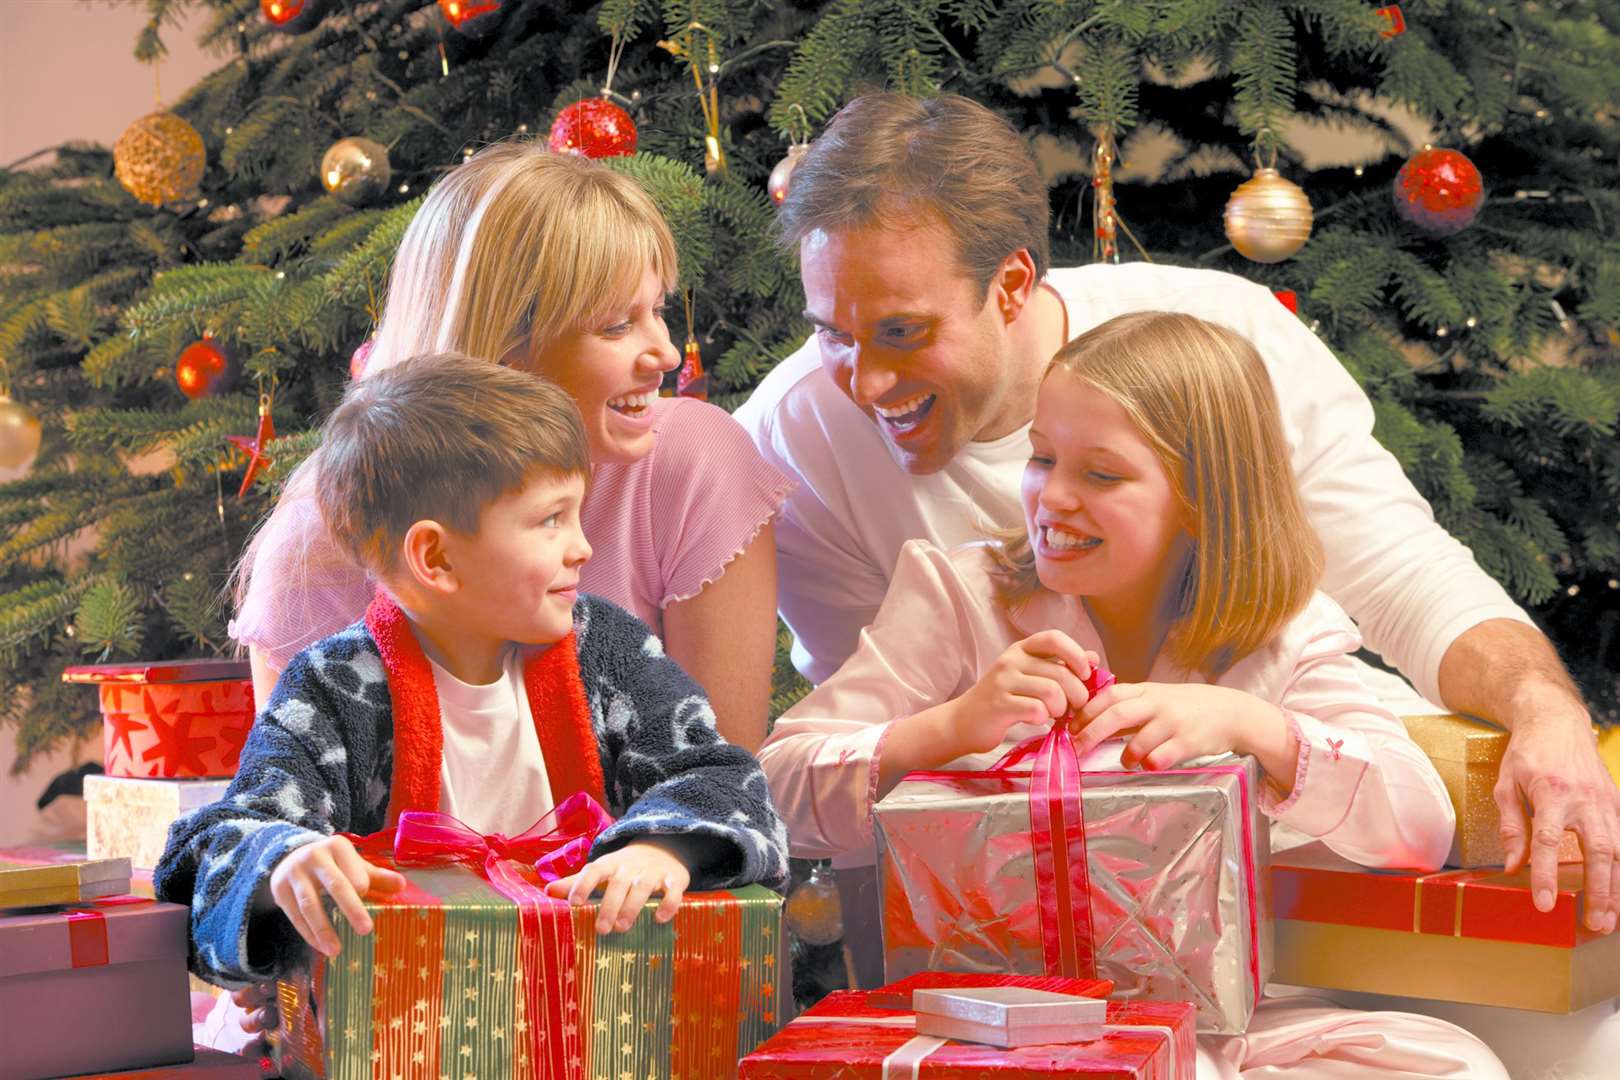 Help people find the perfect gifts for their family and friends